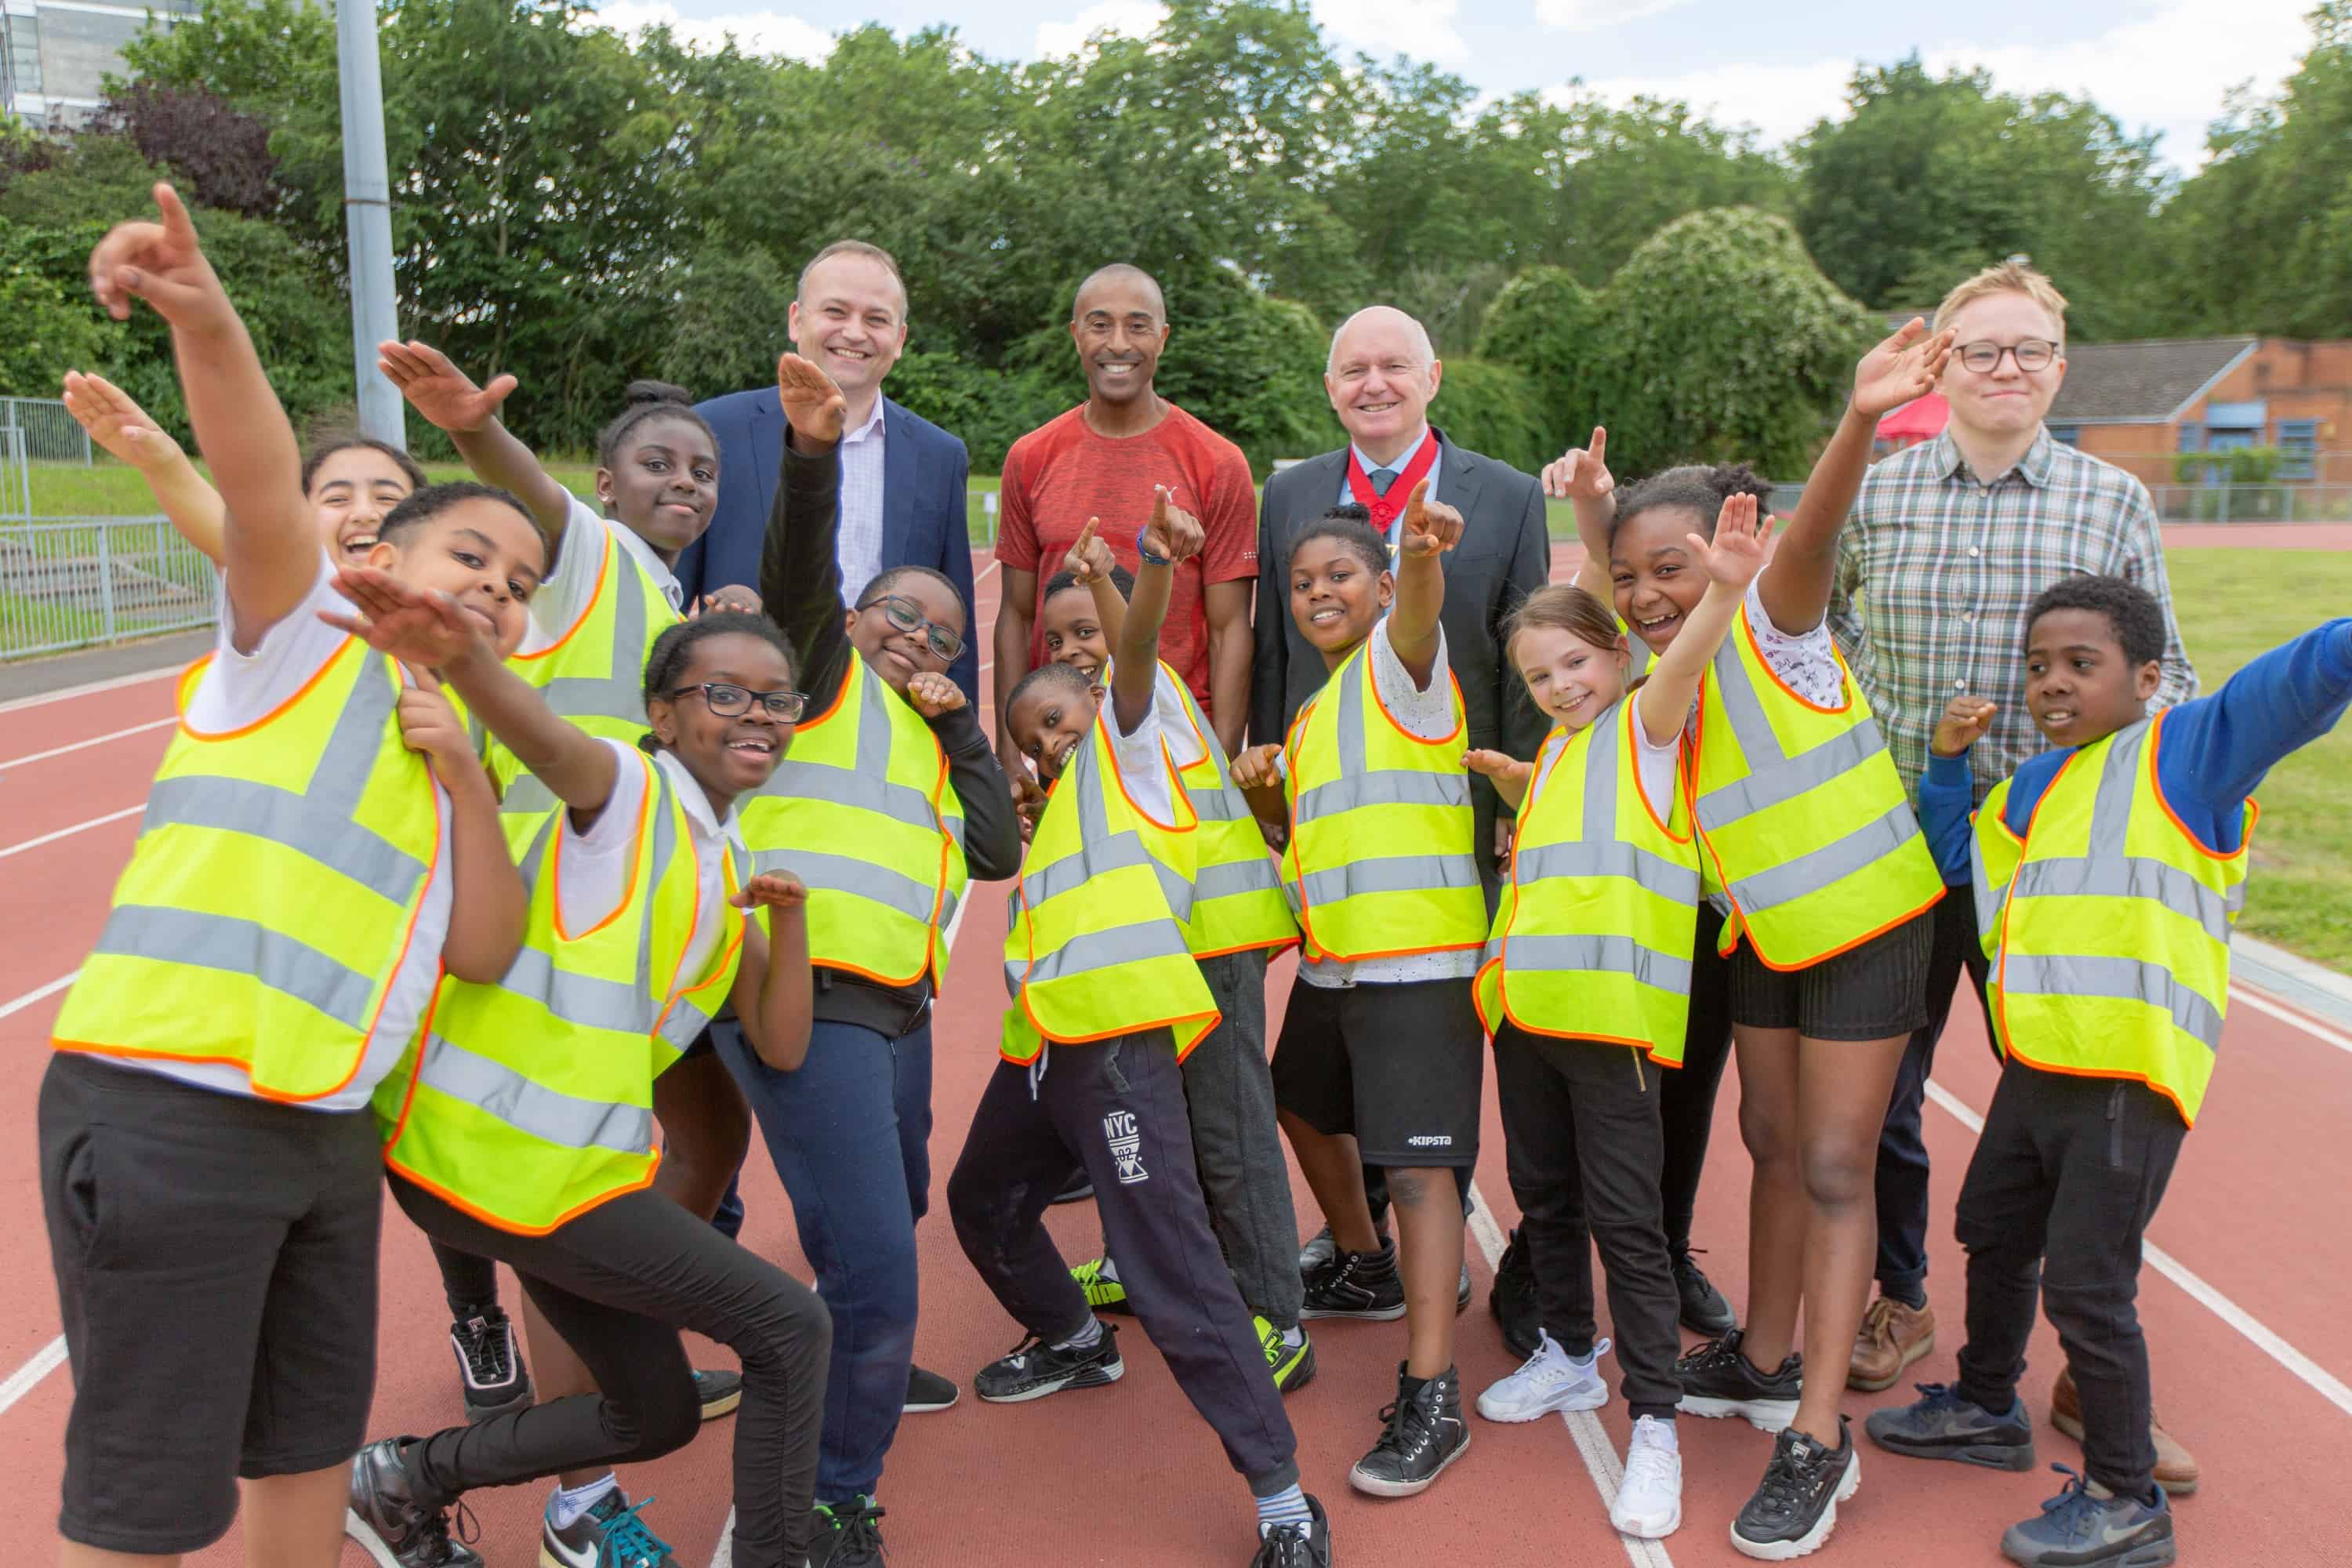 Children from Rotherhithe Primary School with MP Neil Coyle Colin Jackson and Cllr Barrie Hargrove